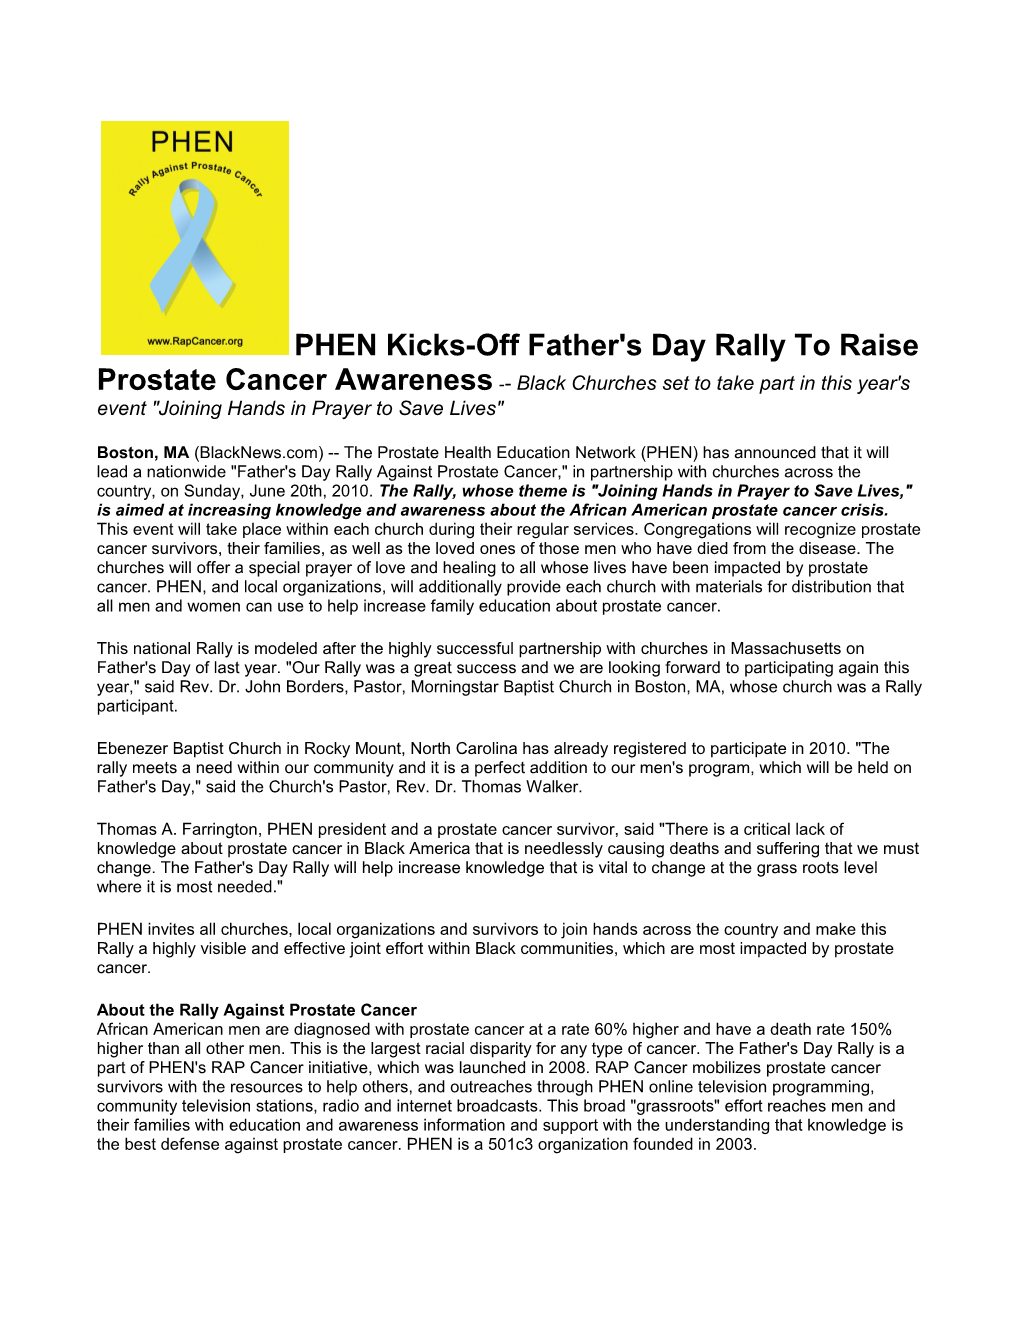 PHEN Kicks-Off Father's Day Rally to Raise Prostate Cancer Awareness Black Churches Set